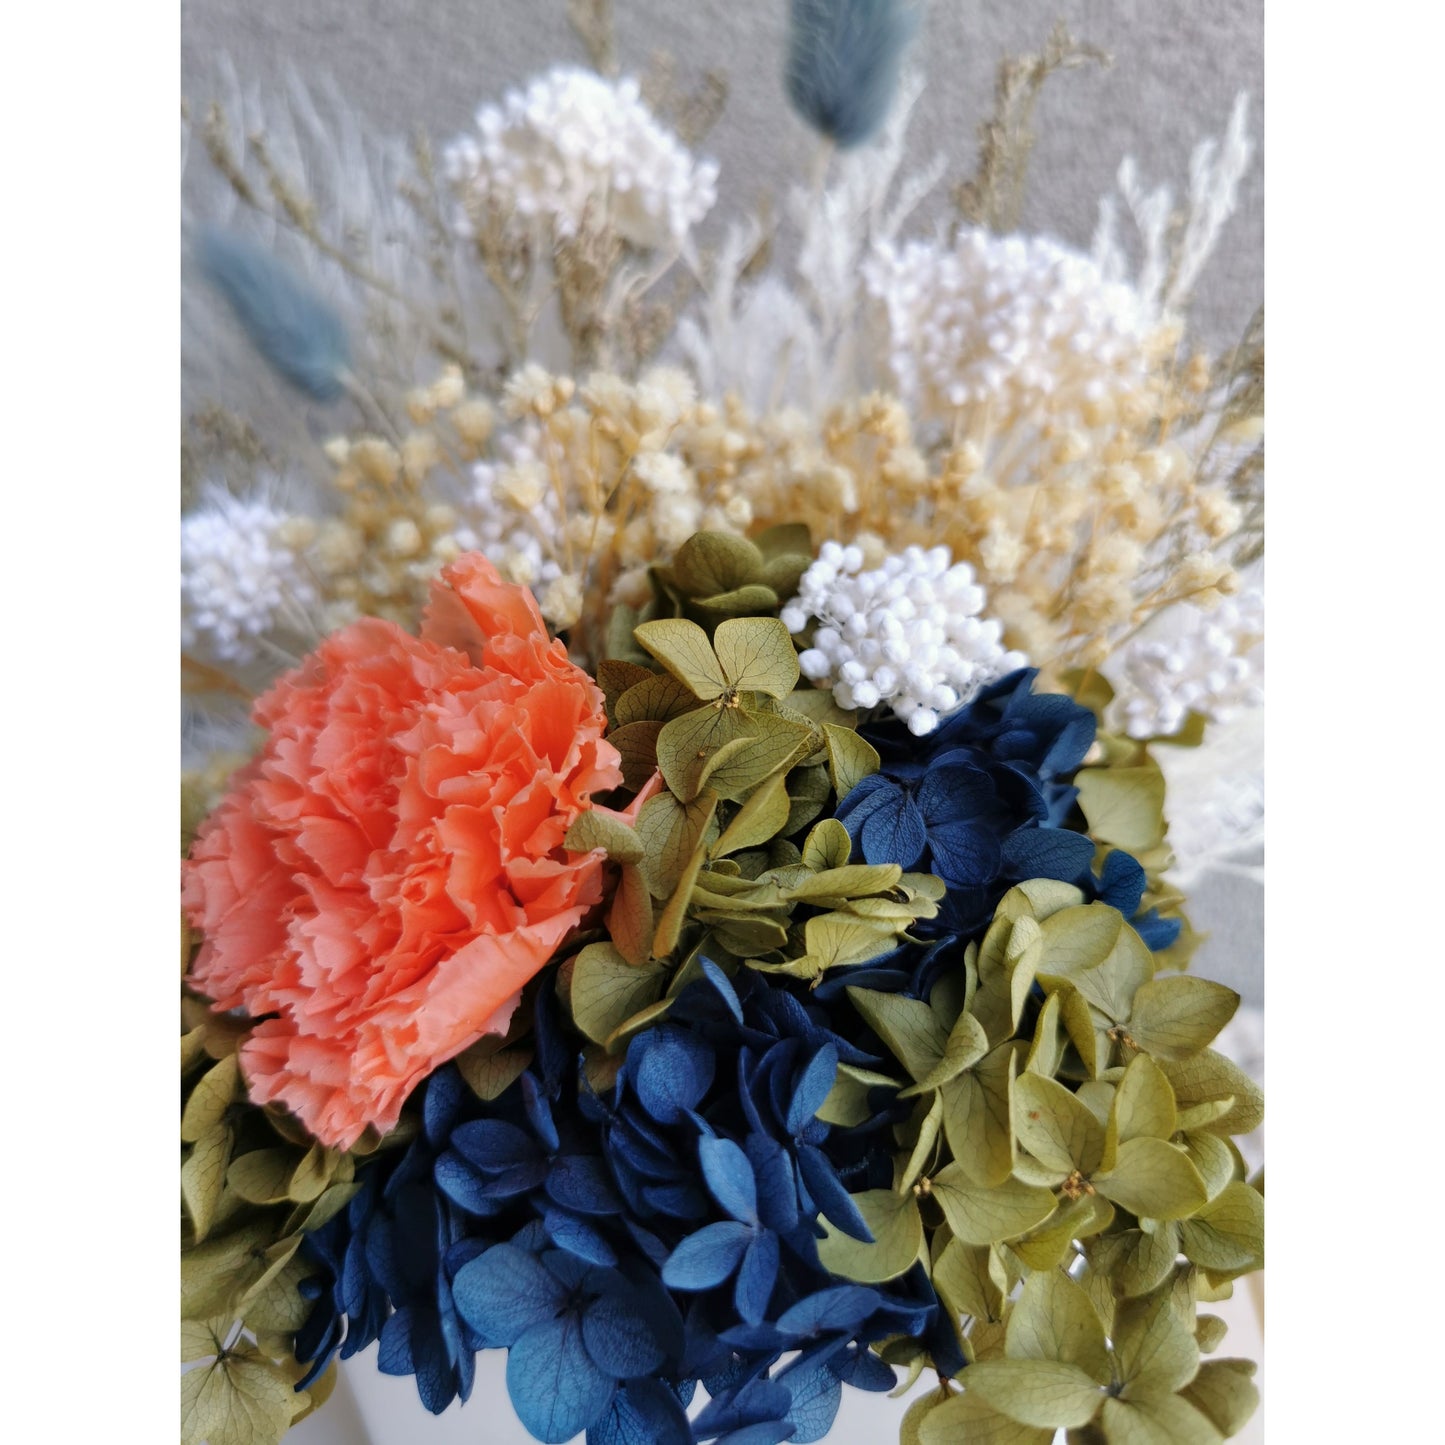 Dried & preserved flower arrangement with navy blue, green, white & orange flowers. Picture shows a close up view of the flowers and colours